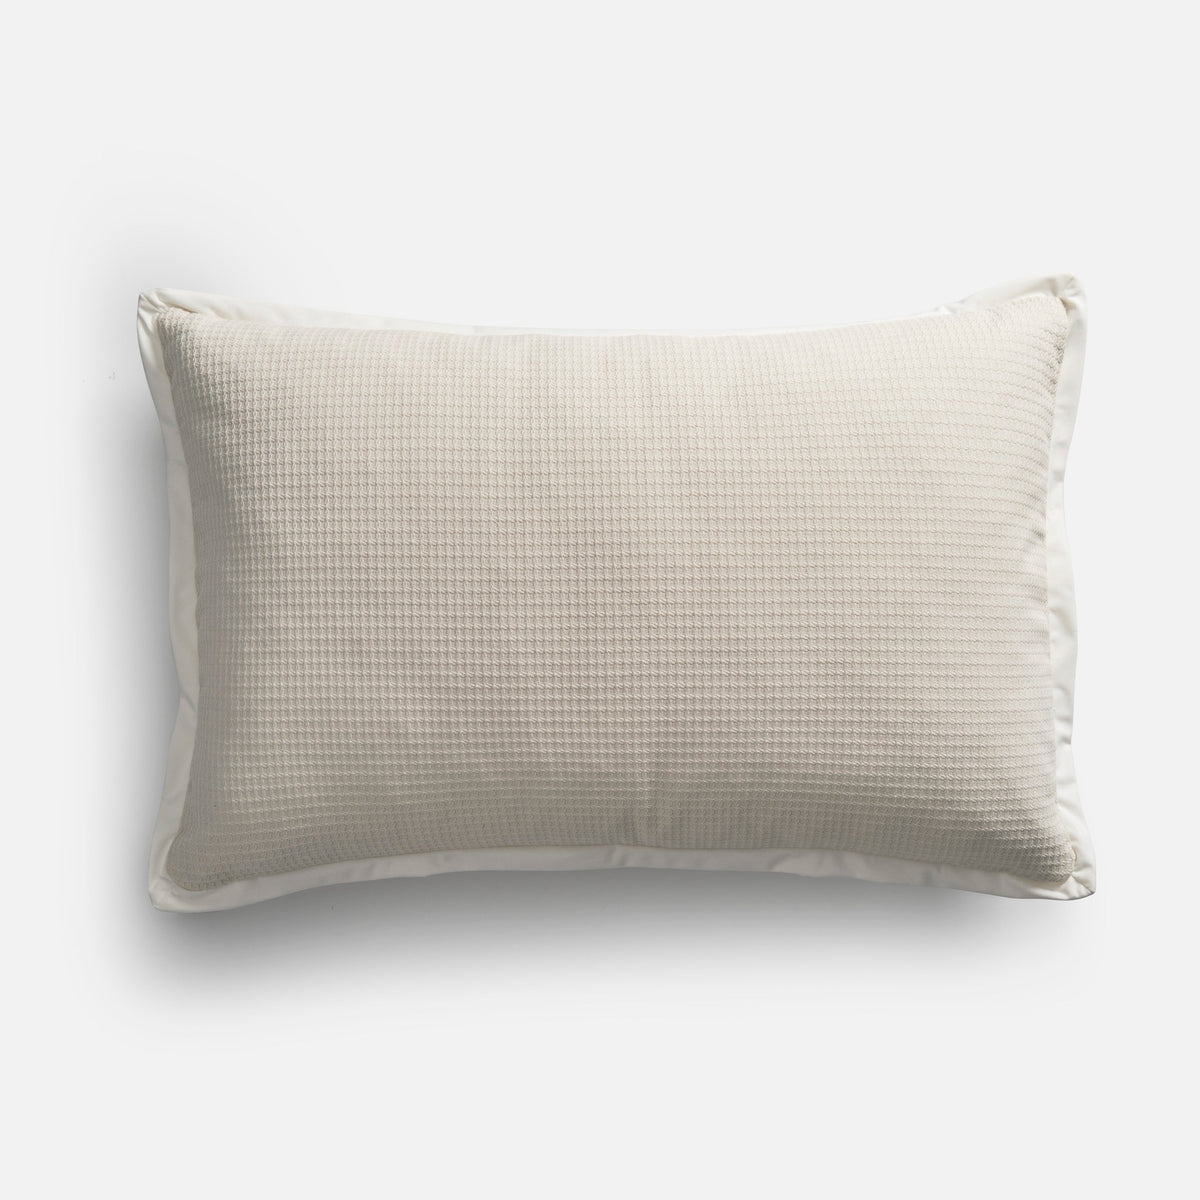 Cicely Cushion - The Finishing Store South Africa